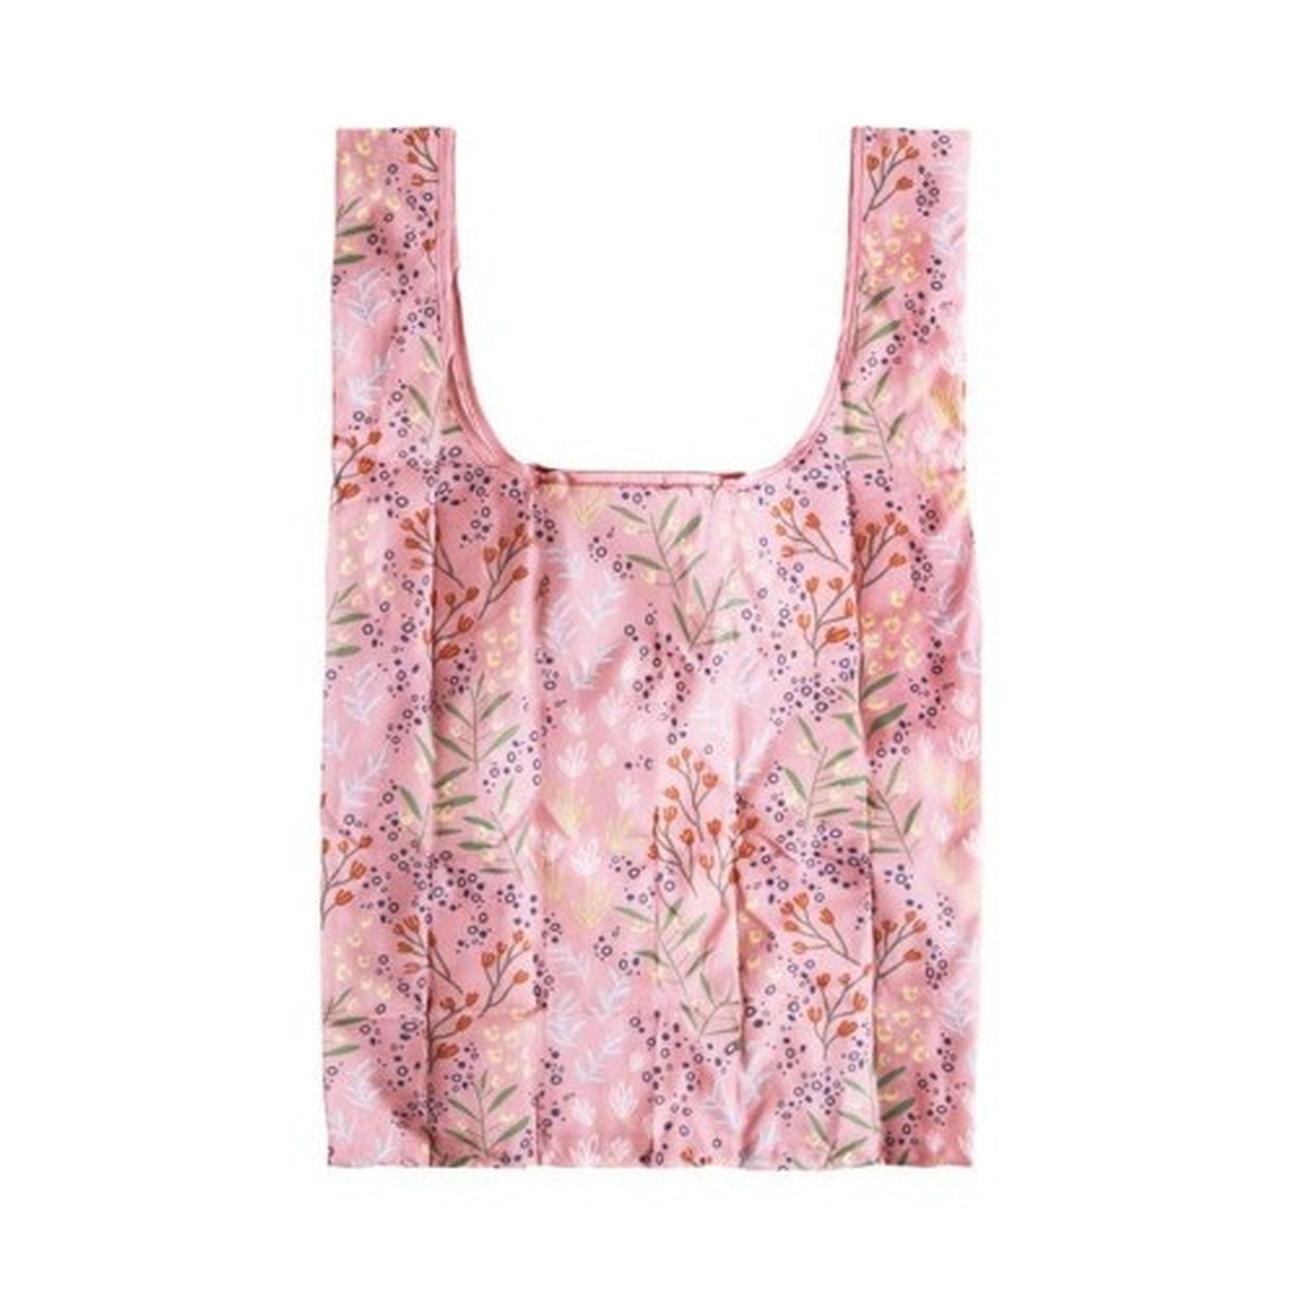 ladelle-eco-recycled-bag-sweet-floral - Ladelle Eco Recycled Bag Sweet Floral 